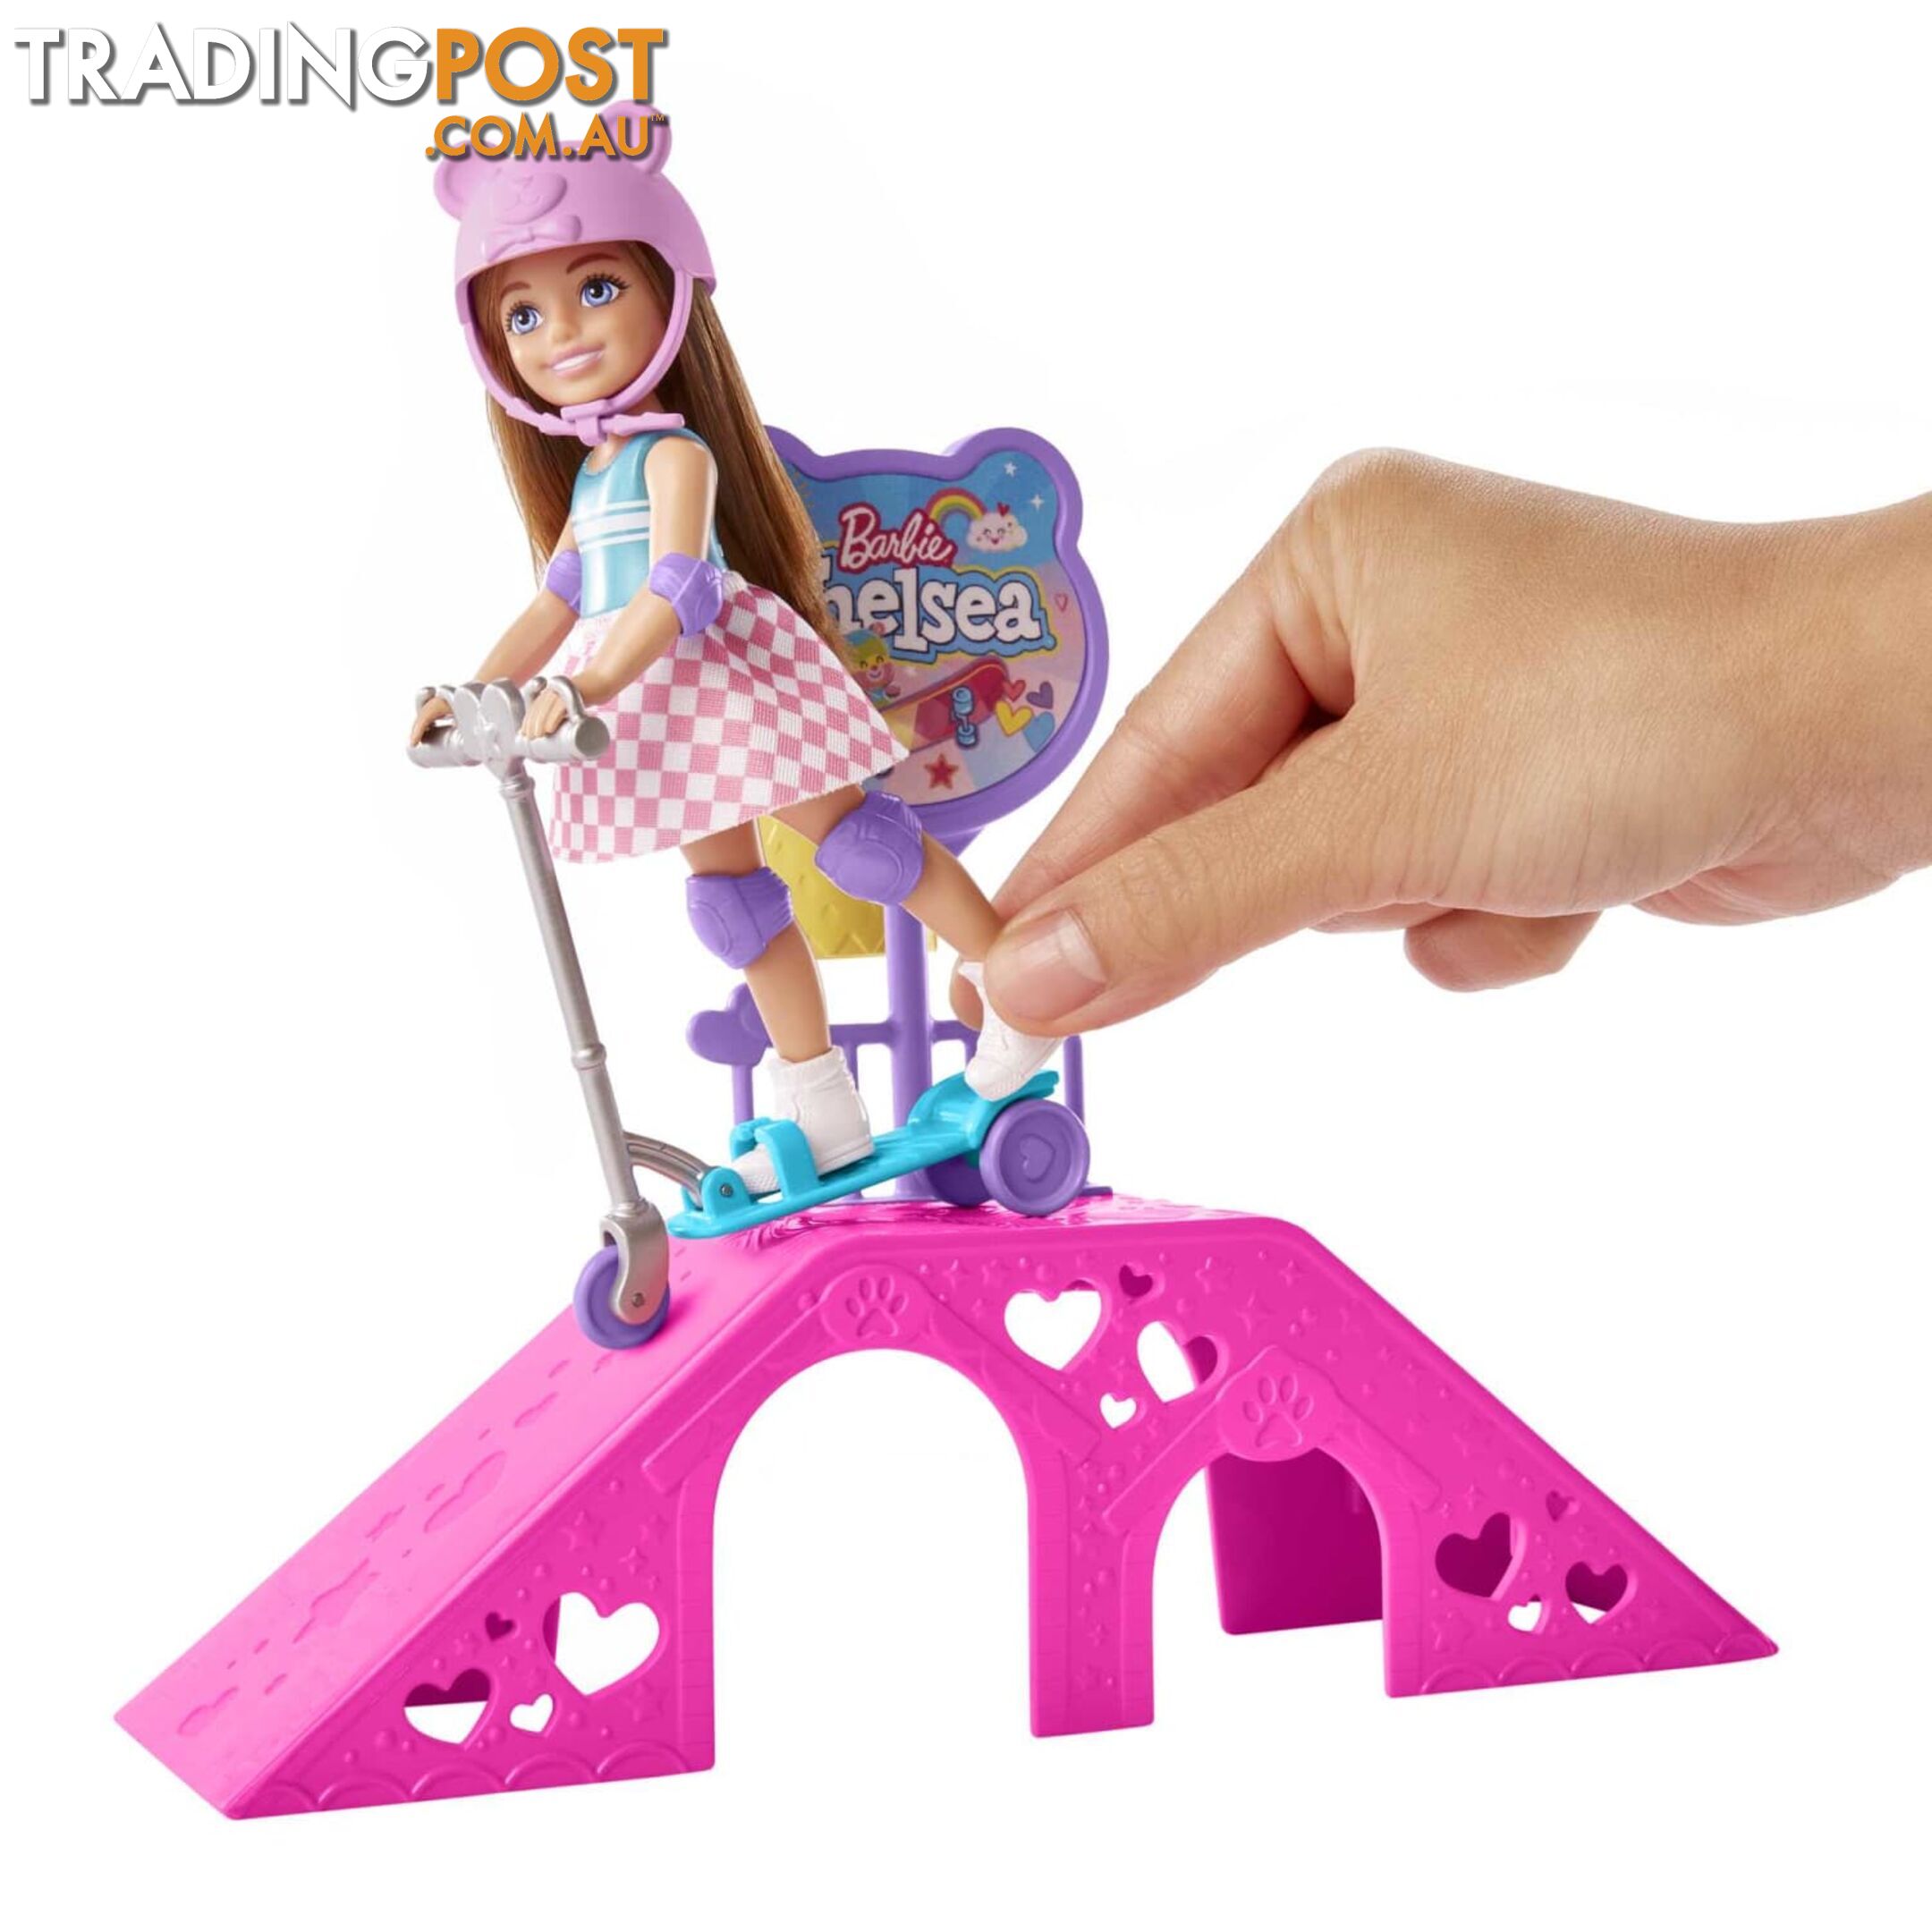 Barbie Chelsea Doll And Accessories Skatepark Playset With 2 Puppies And 15+ Pieces - Mahjy35 - 194735098279